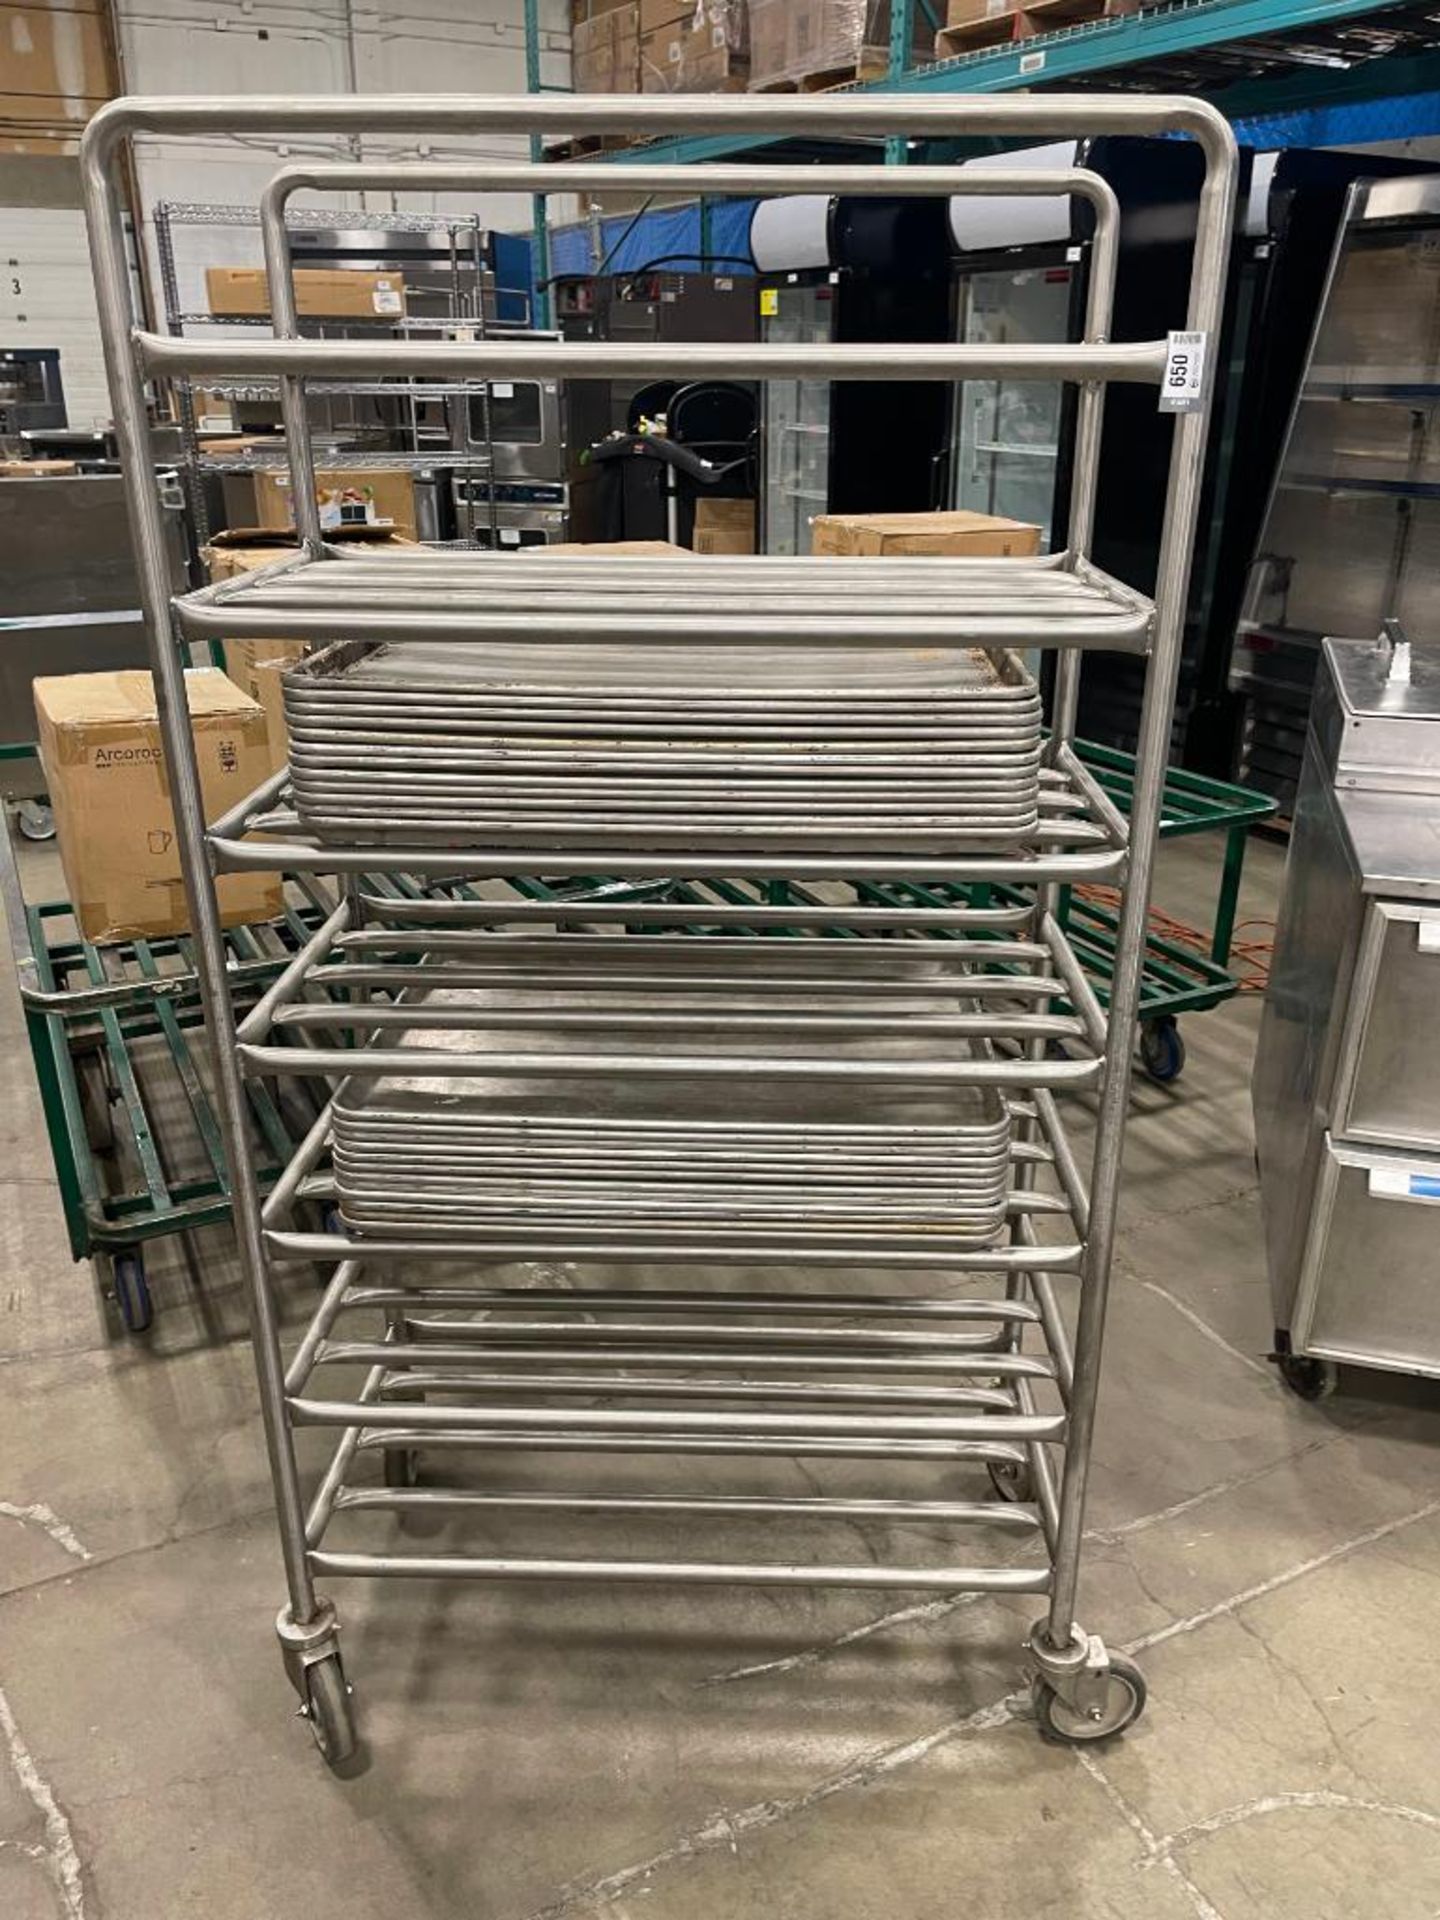 7 TIER STAINLESS STEEL MOBILE PLATTER CART WITH (24) FULL SIZE BUN PANS - Image 5 of 6